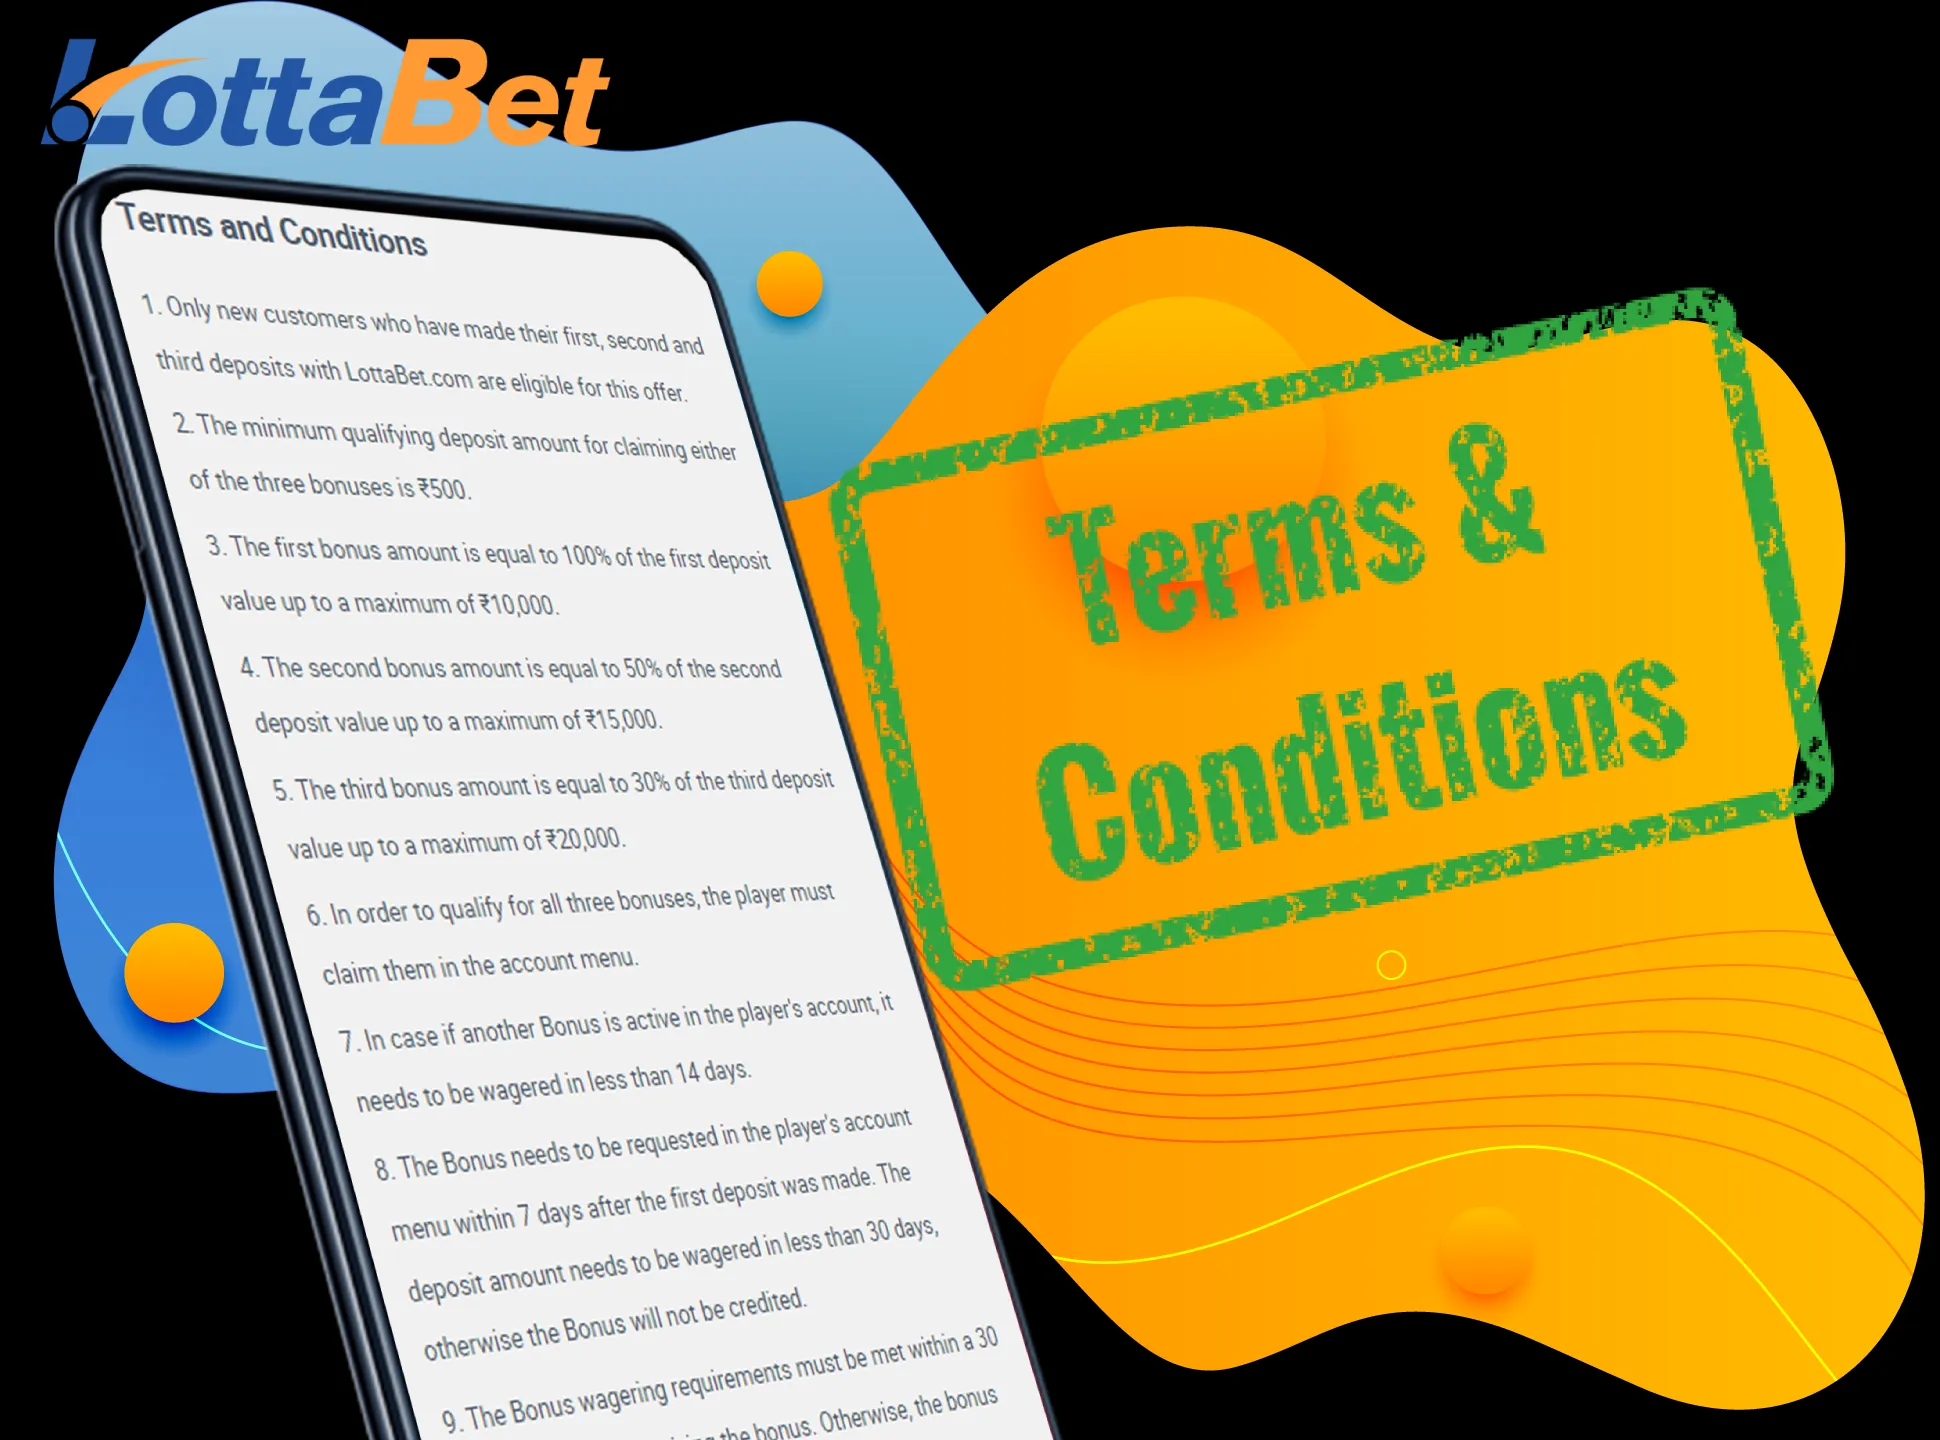 Read these terms to know more about the Lottabet bonuses.